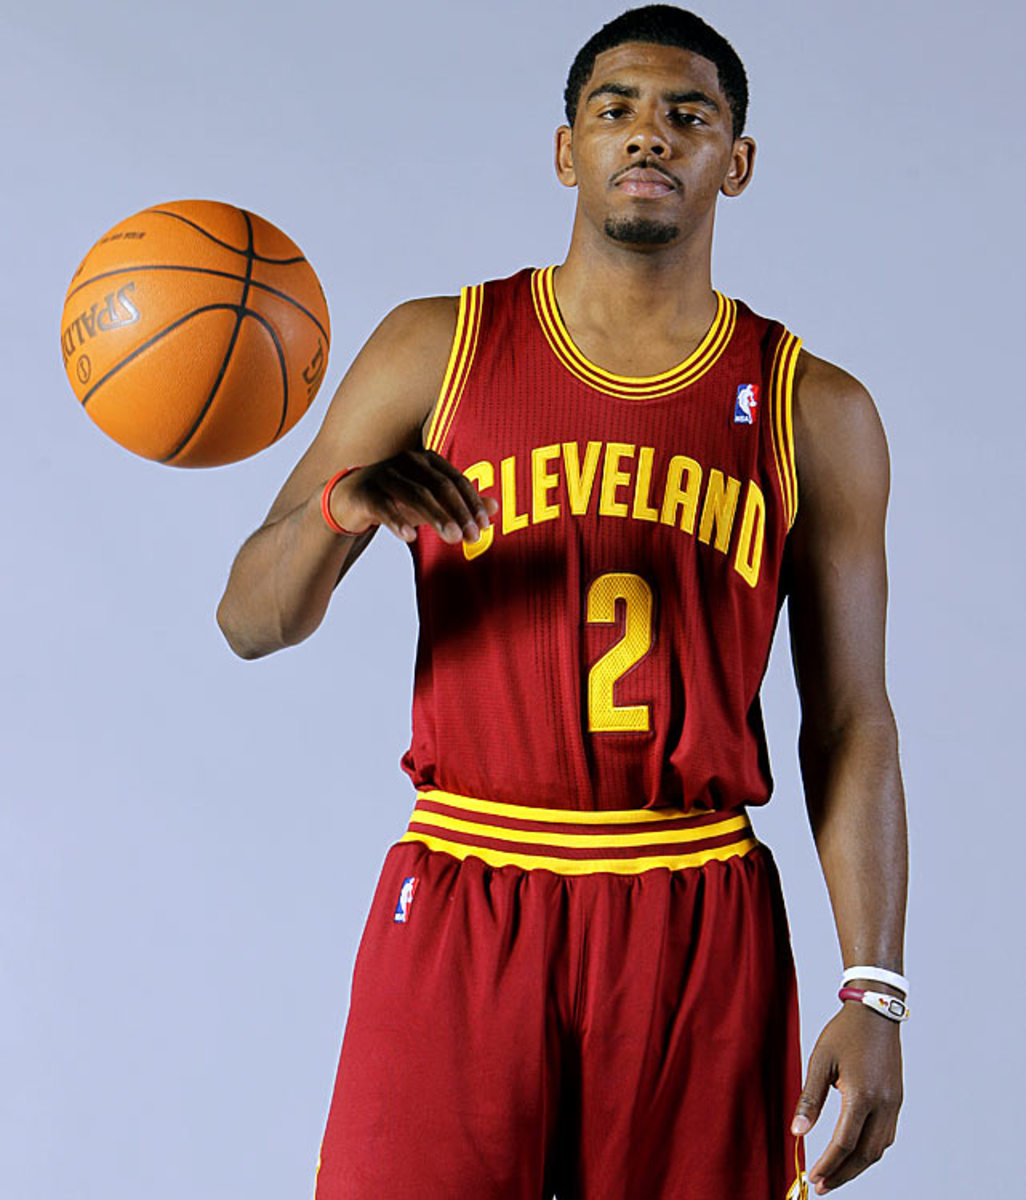 kyrie irving rookie jersey